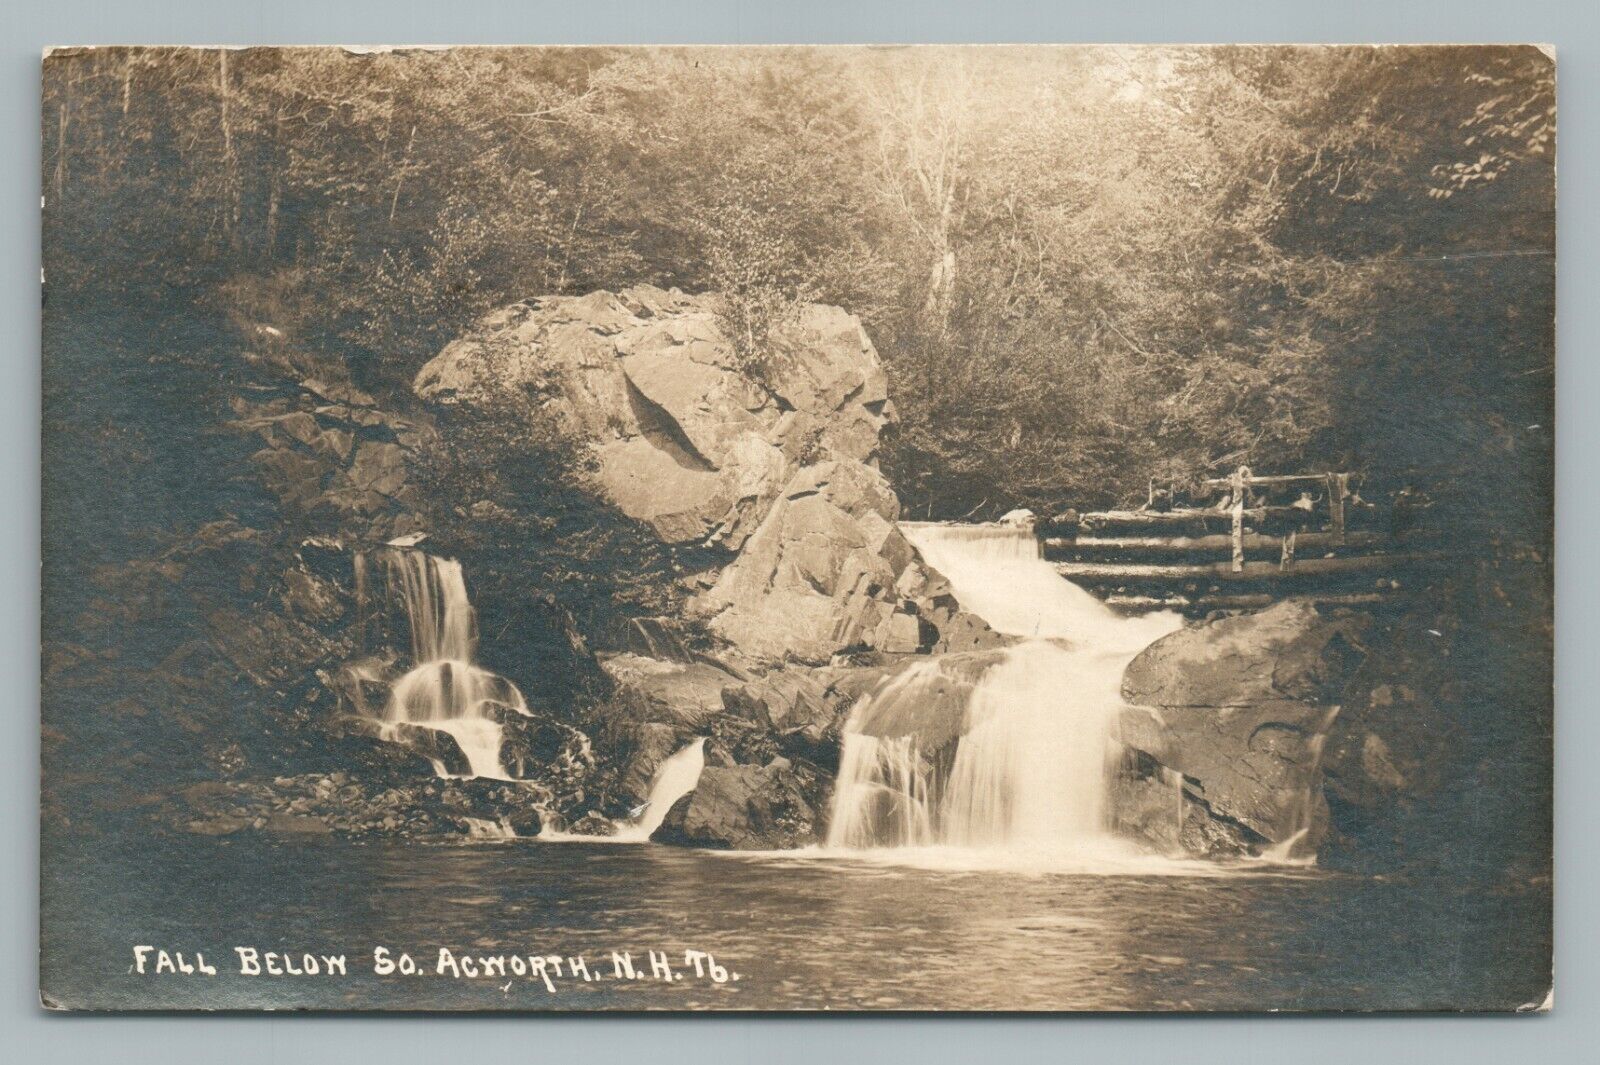 Cold River Waterfalls—South ACWORTH New Hampshire RPPC Antique Photo 1910s